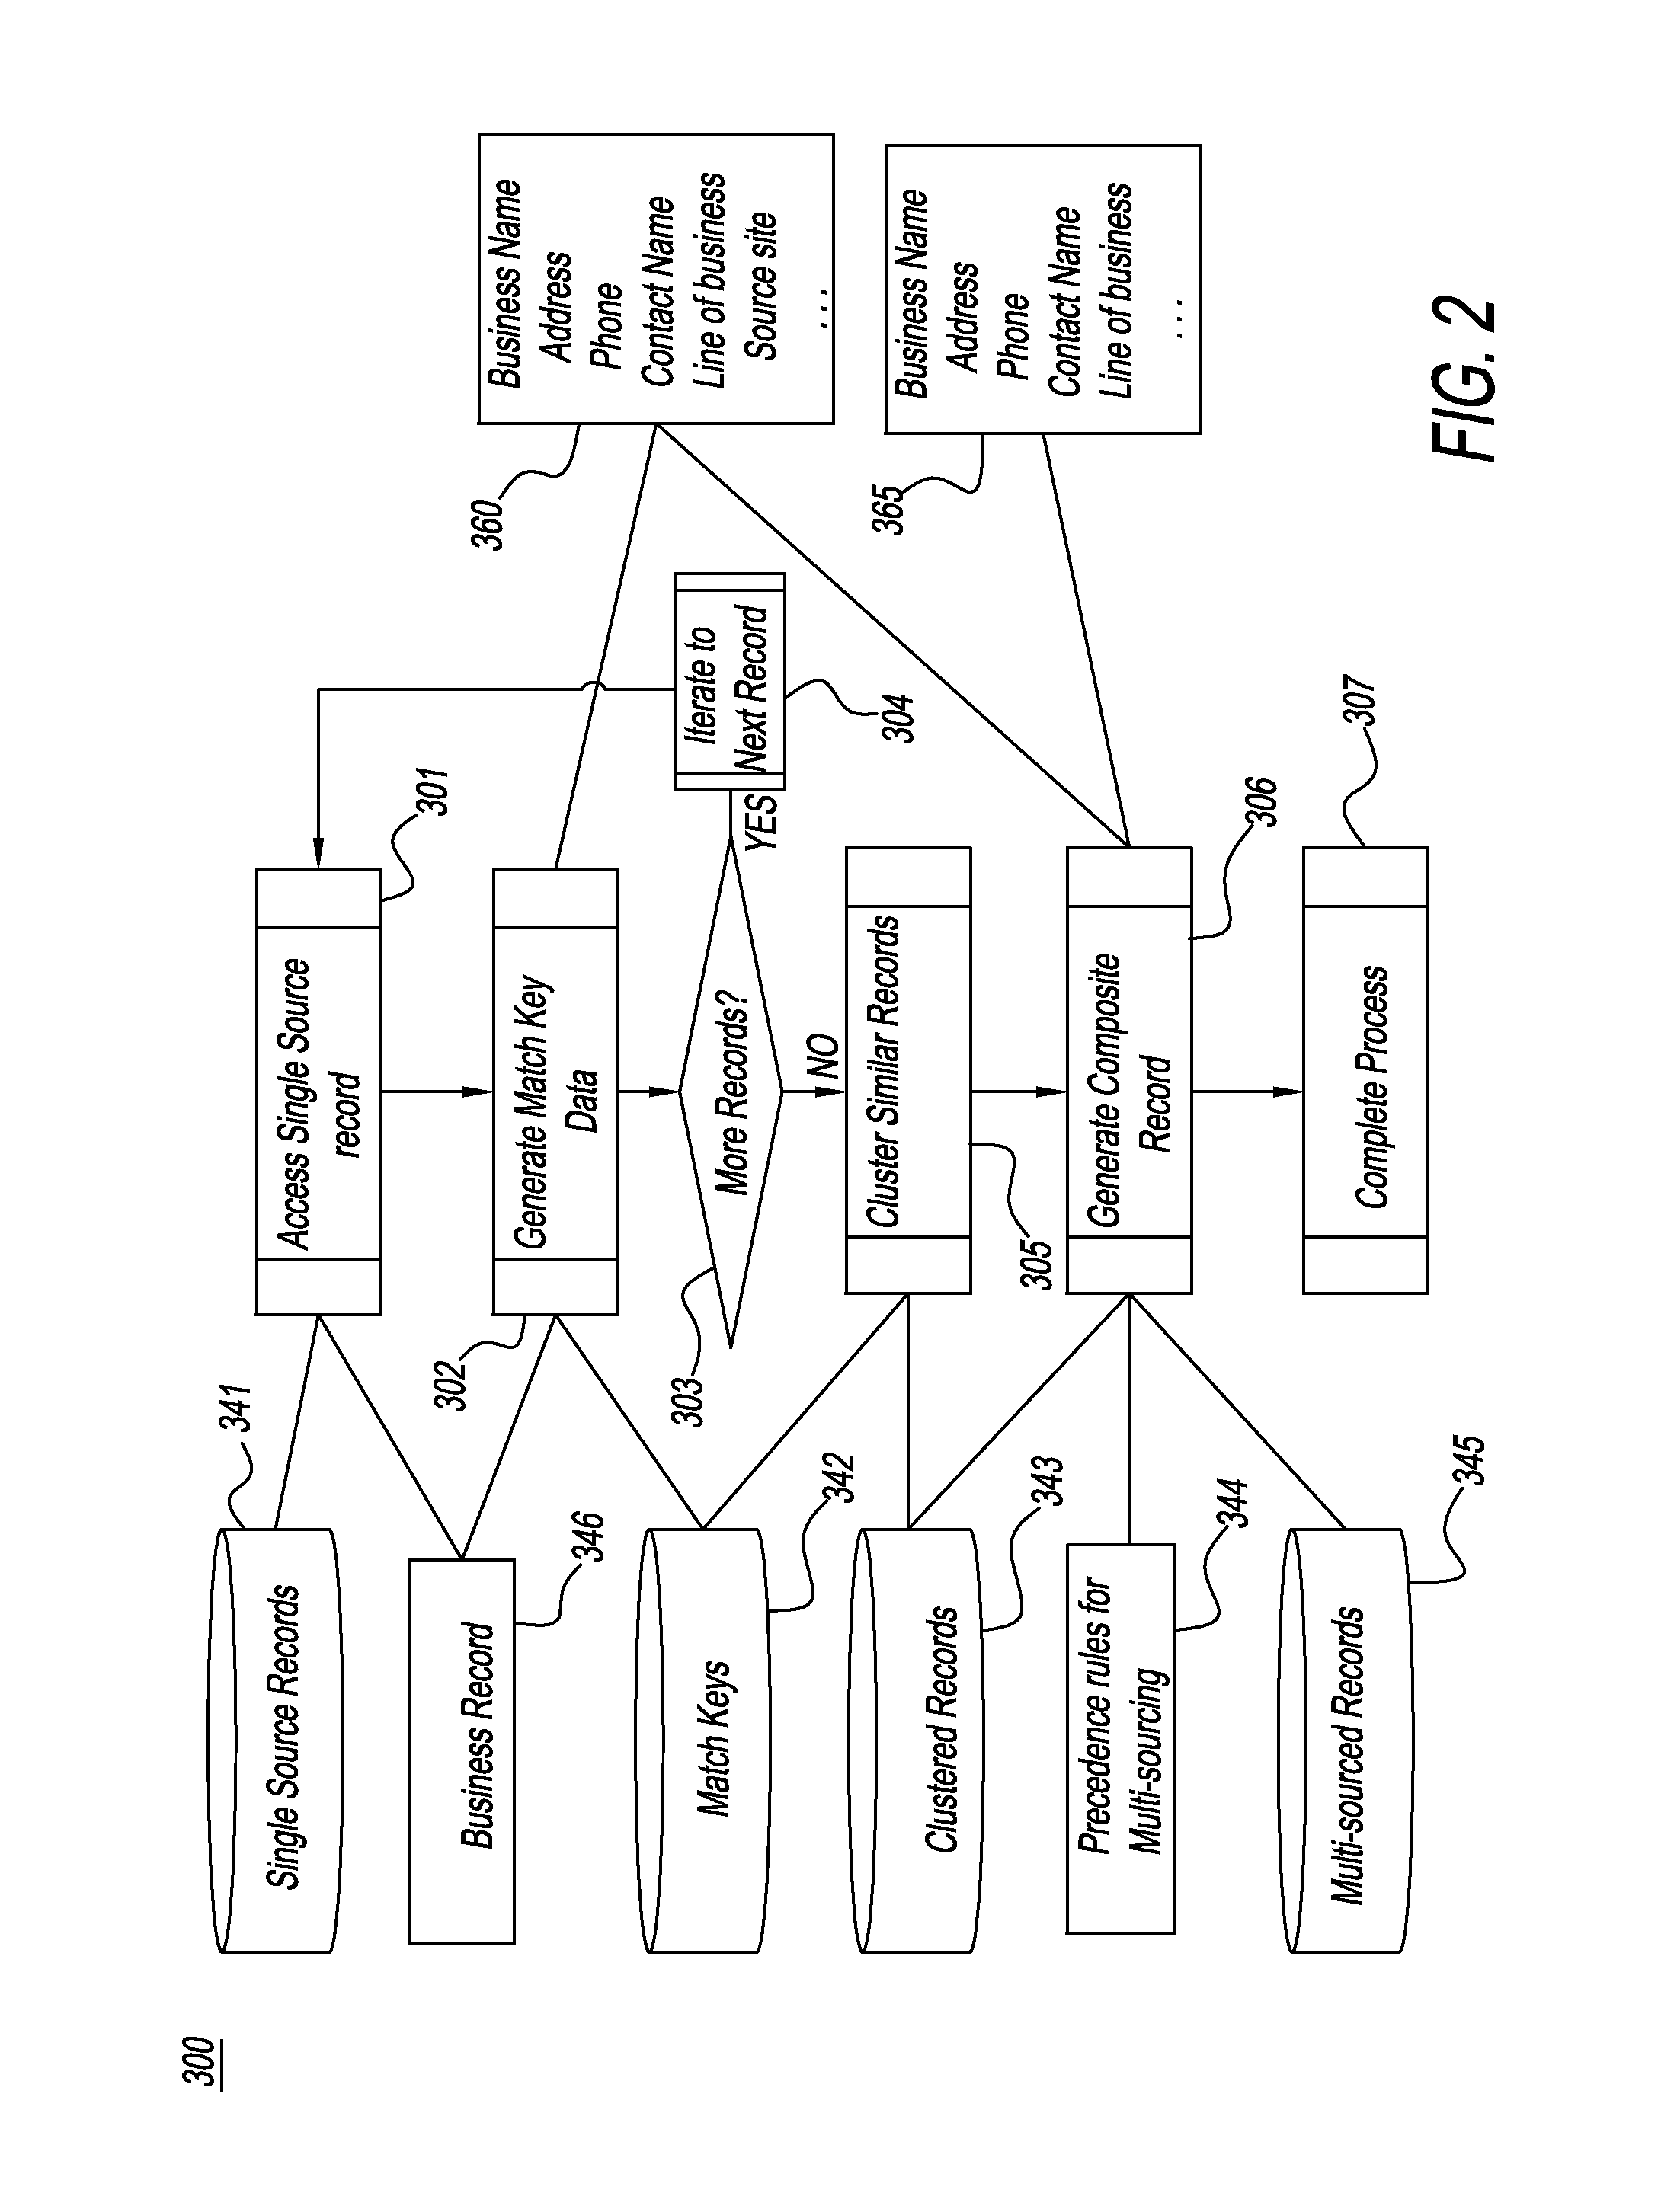 System and method for recursively traversing the internet and other sources to identify, gather, curate, adjudicate, and qualify business identity and related data